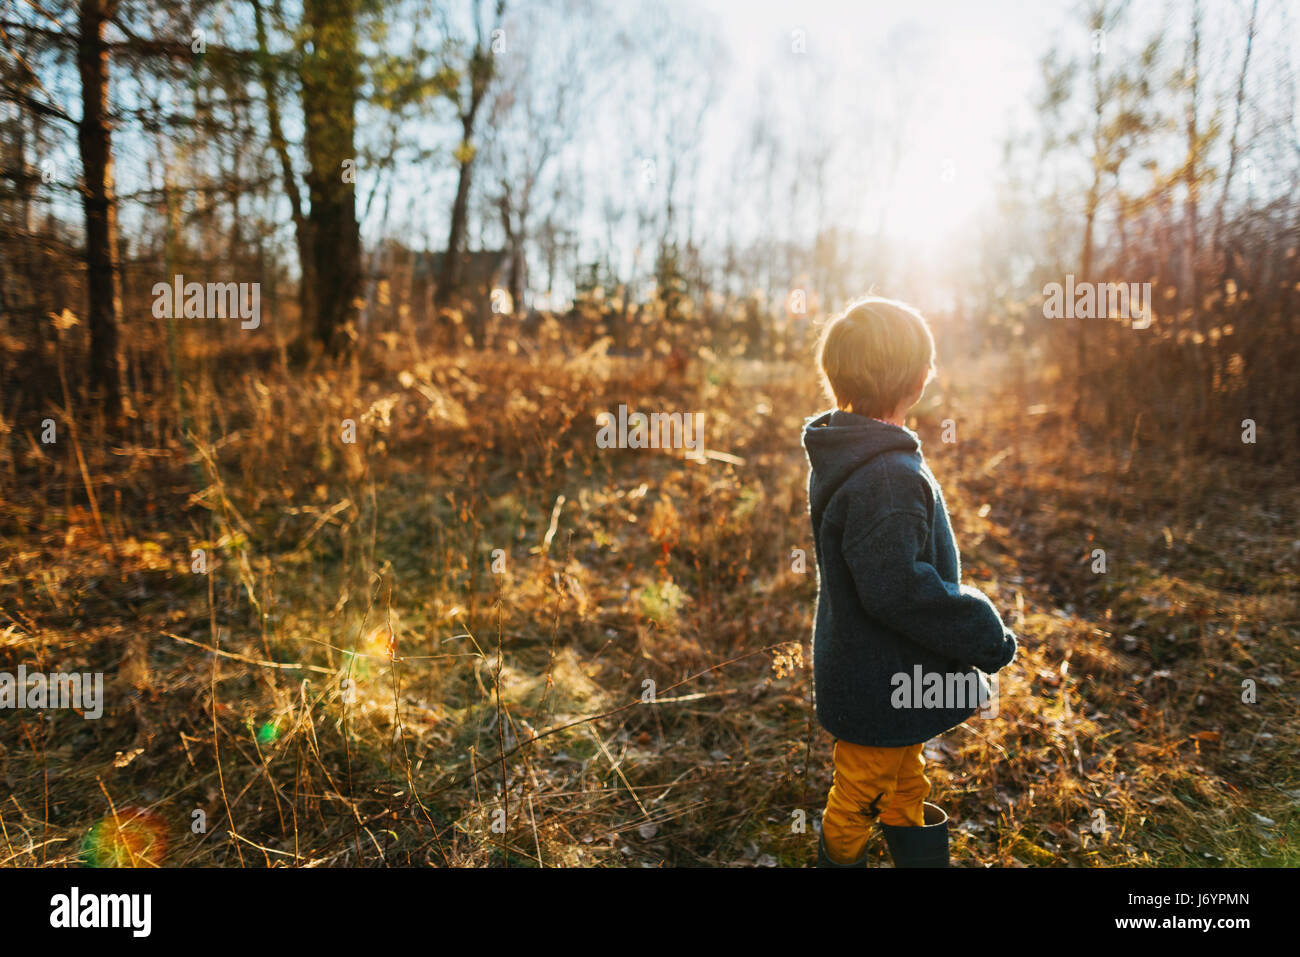 Boy standing on a trail in forest Stock Photo